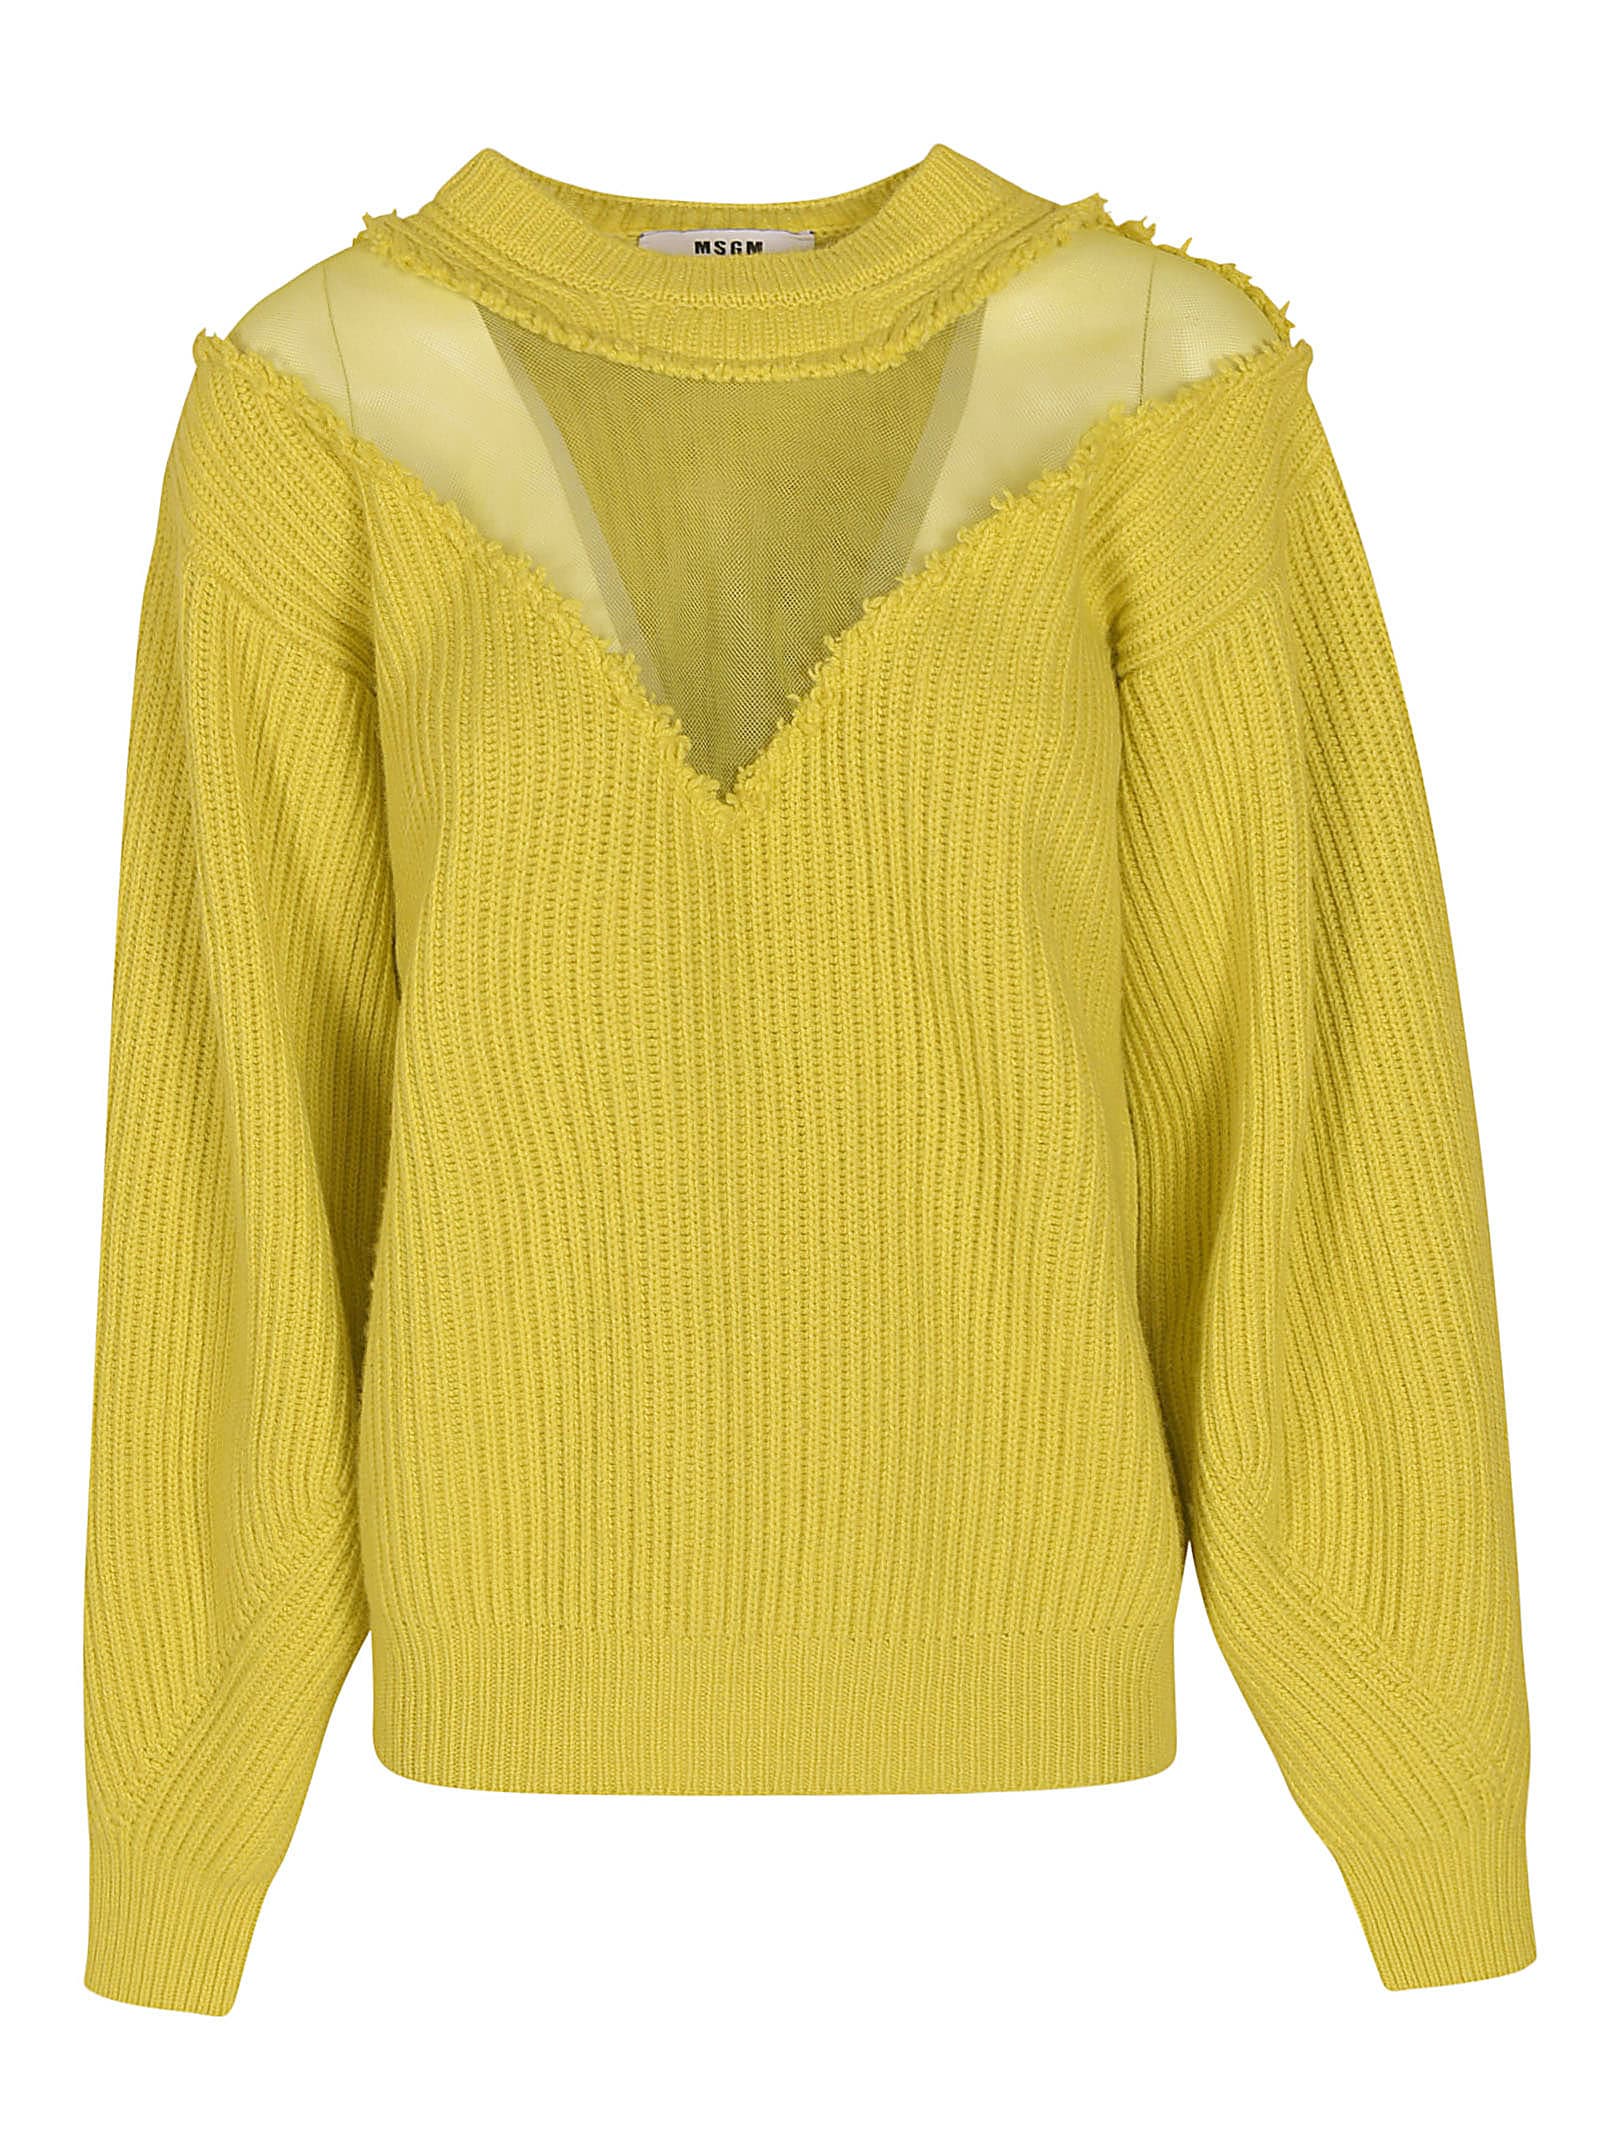 MSGM Lace Chest Ribbed Sweater